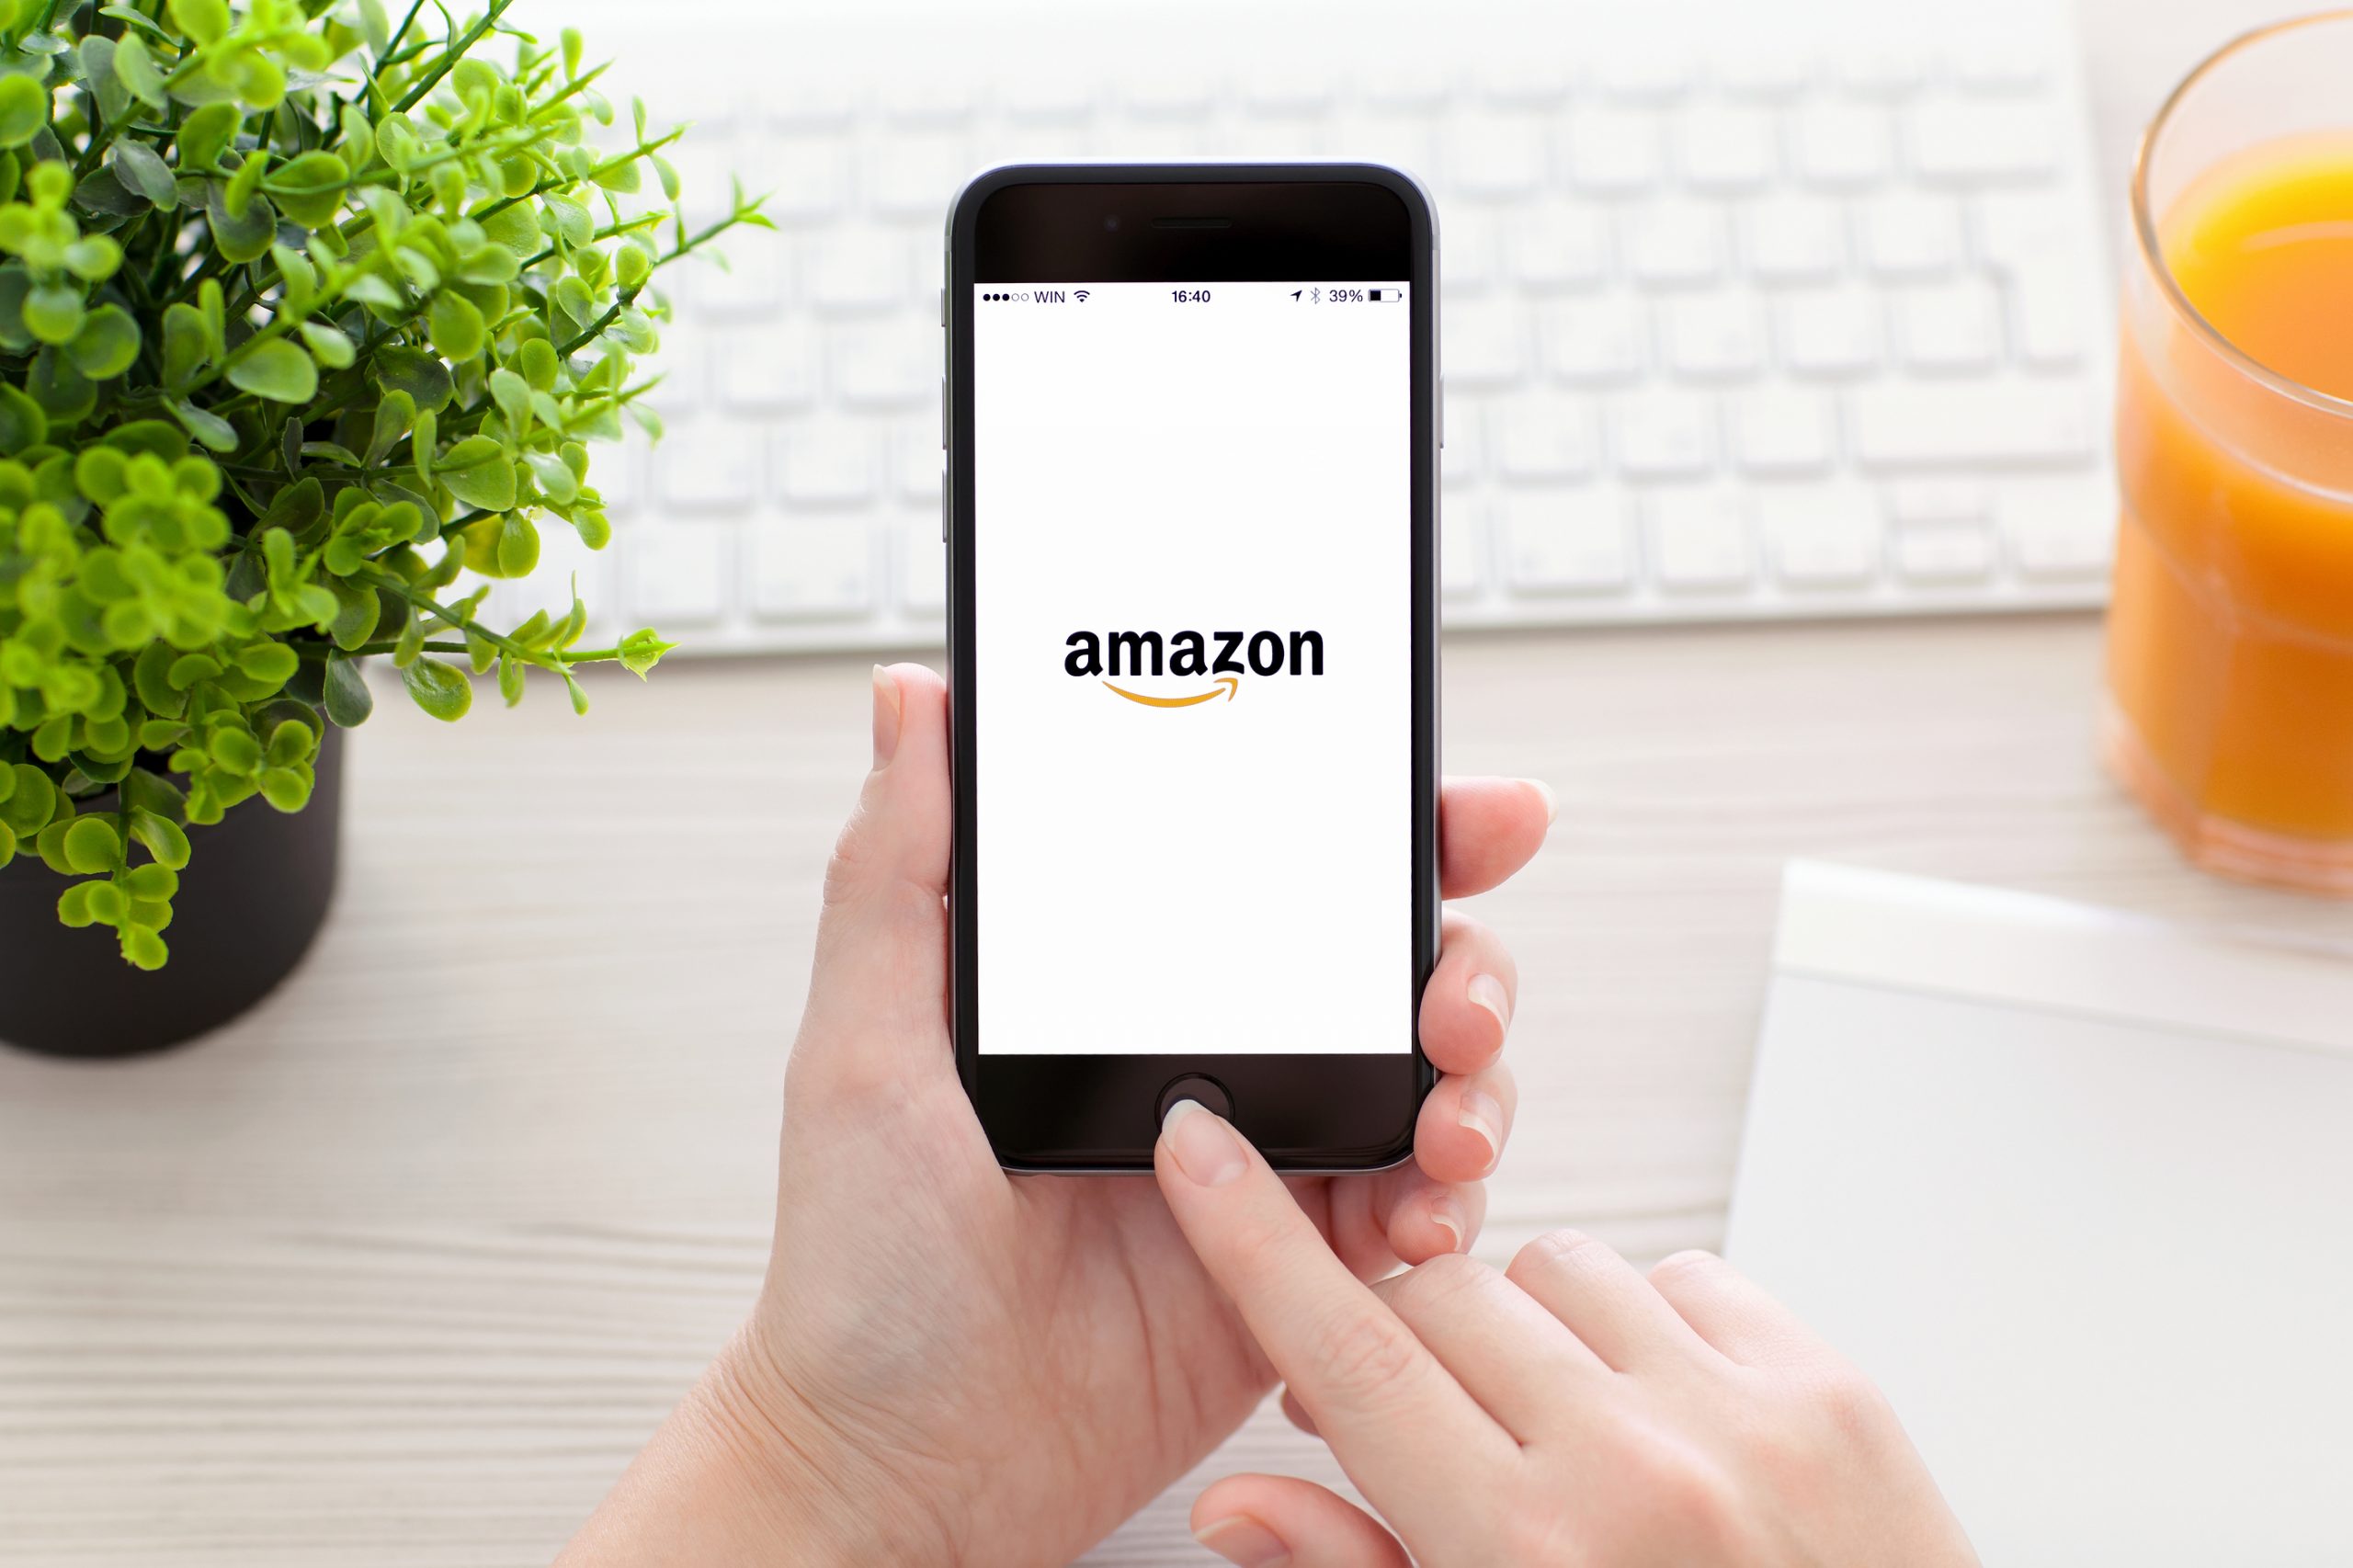 Free shopping apps that pay you in Amazon gift cards